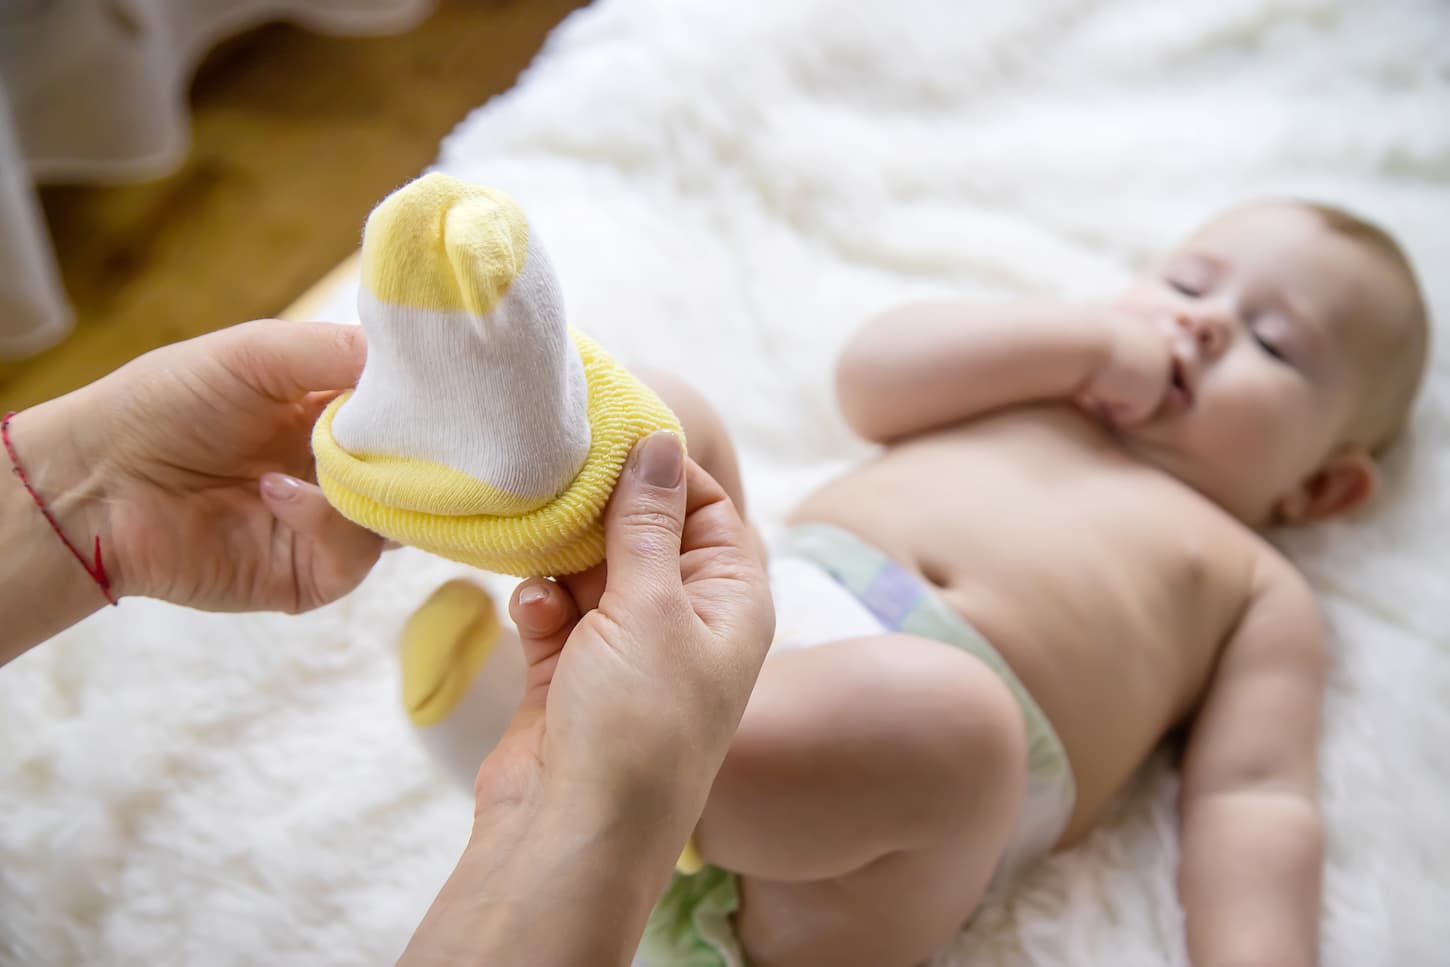 An image of a Mother putting socks on the little baby.